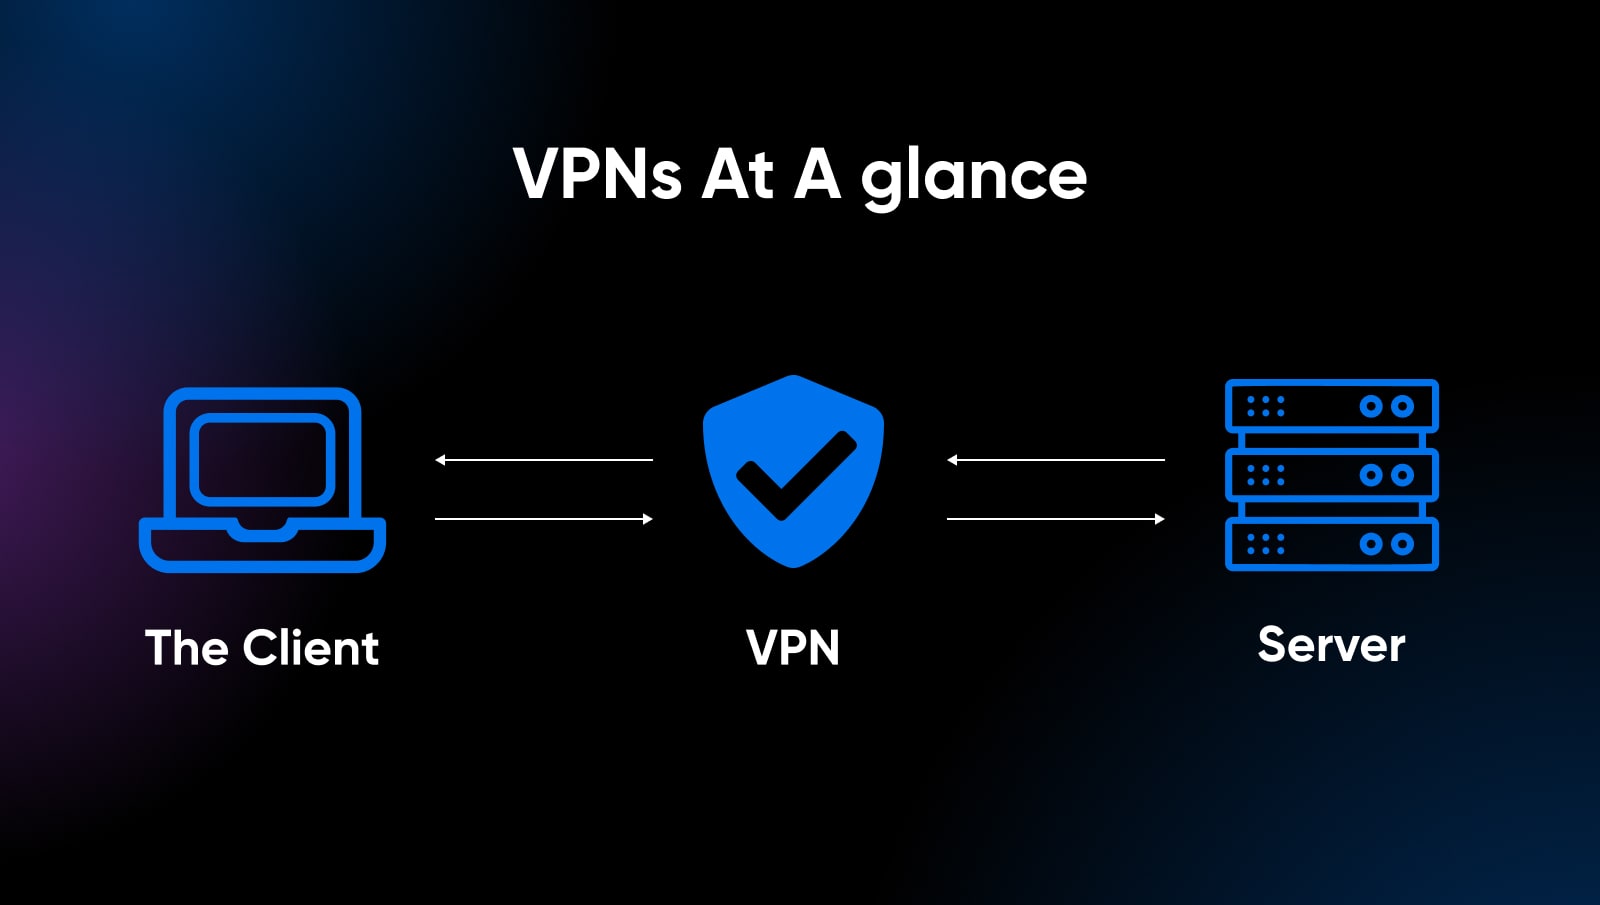 VPNs at a glance showing the VPB as a comms point between the client and the server